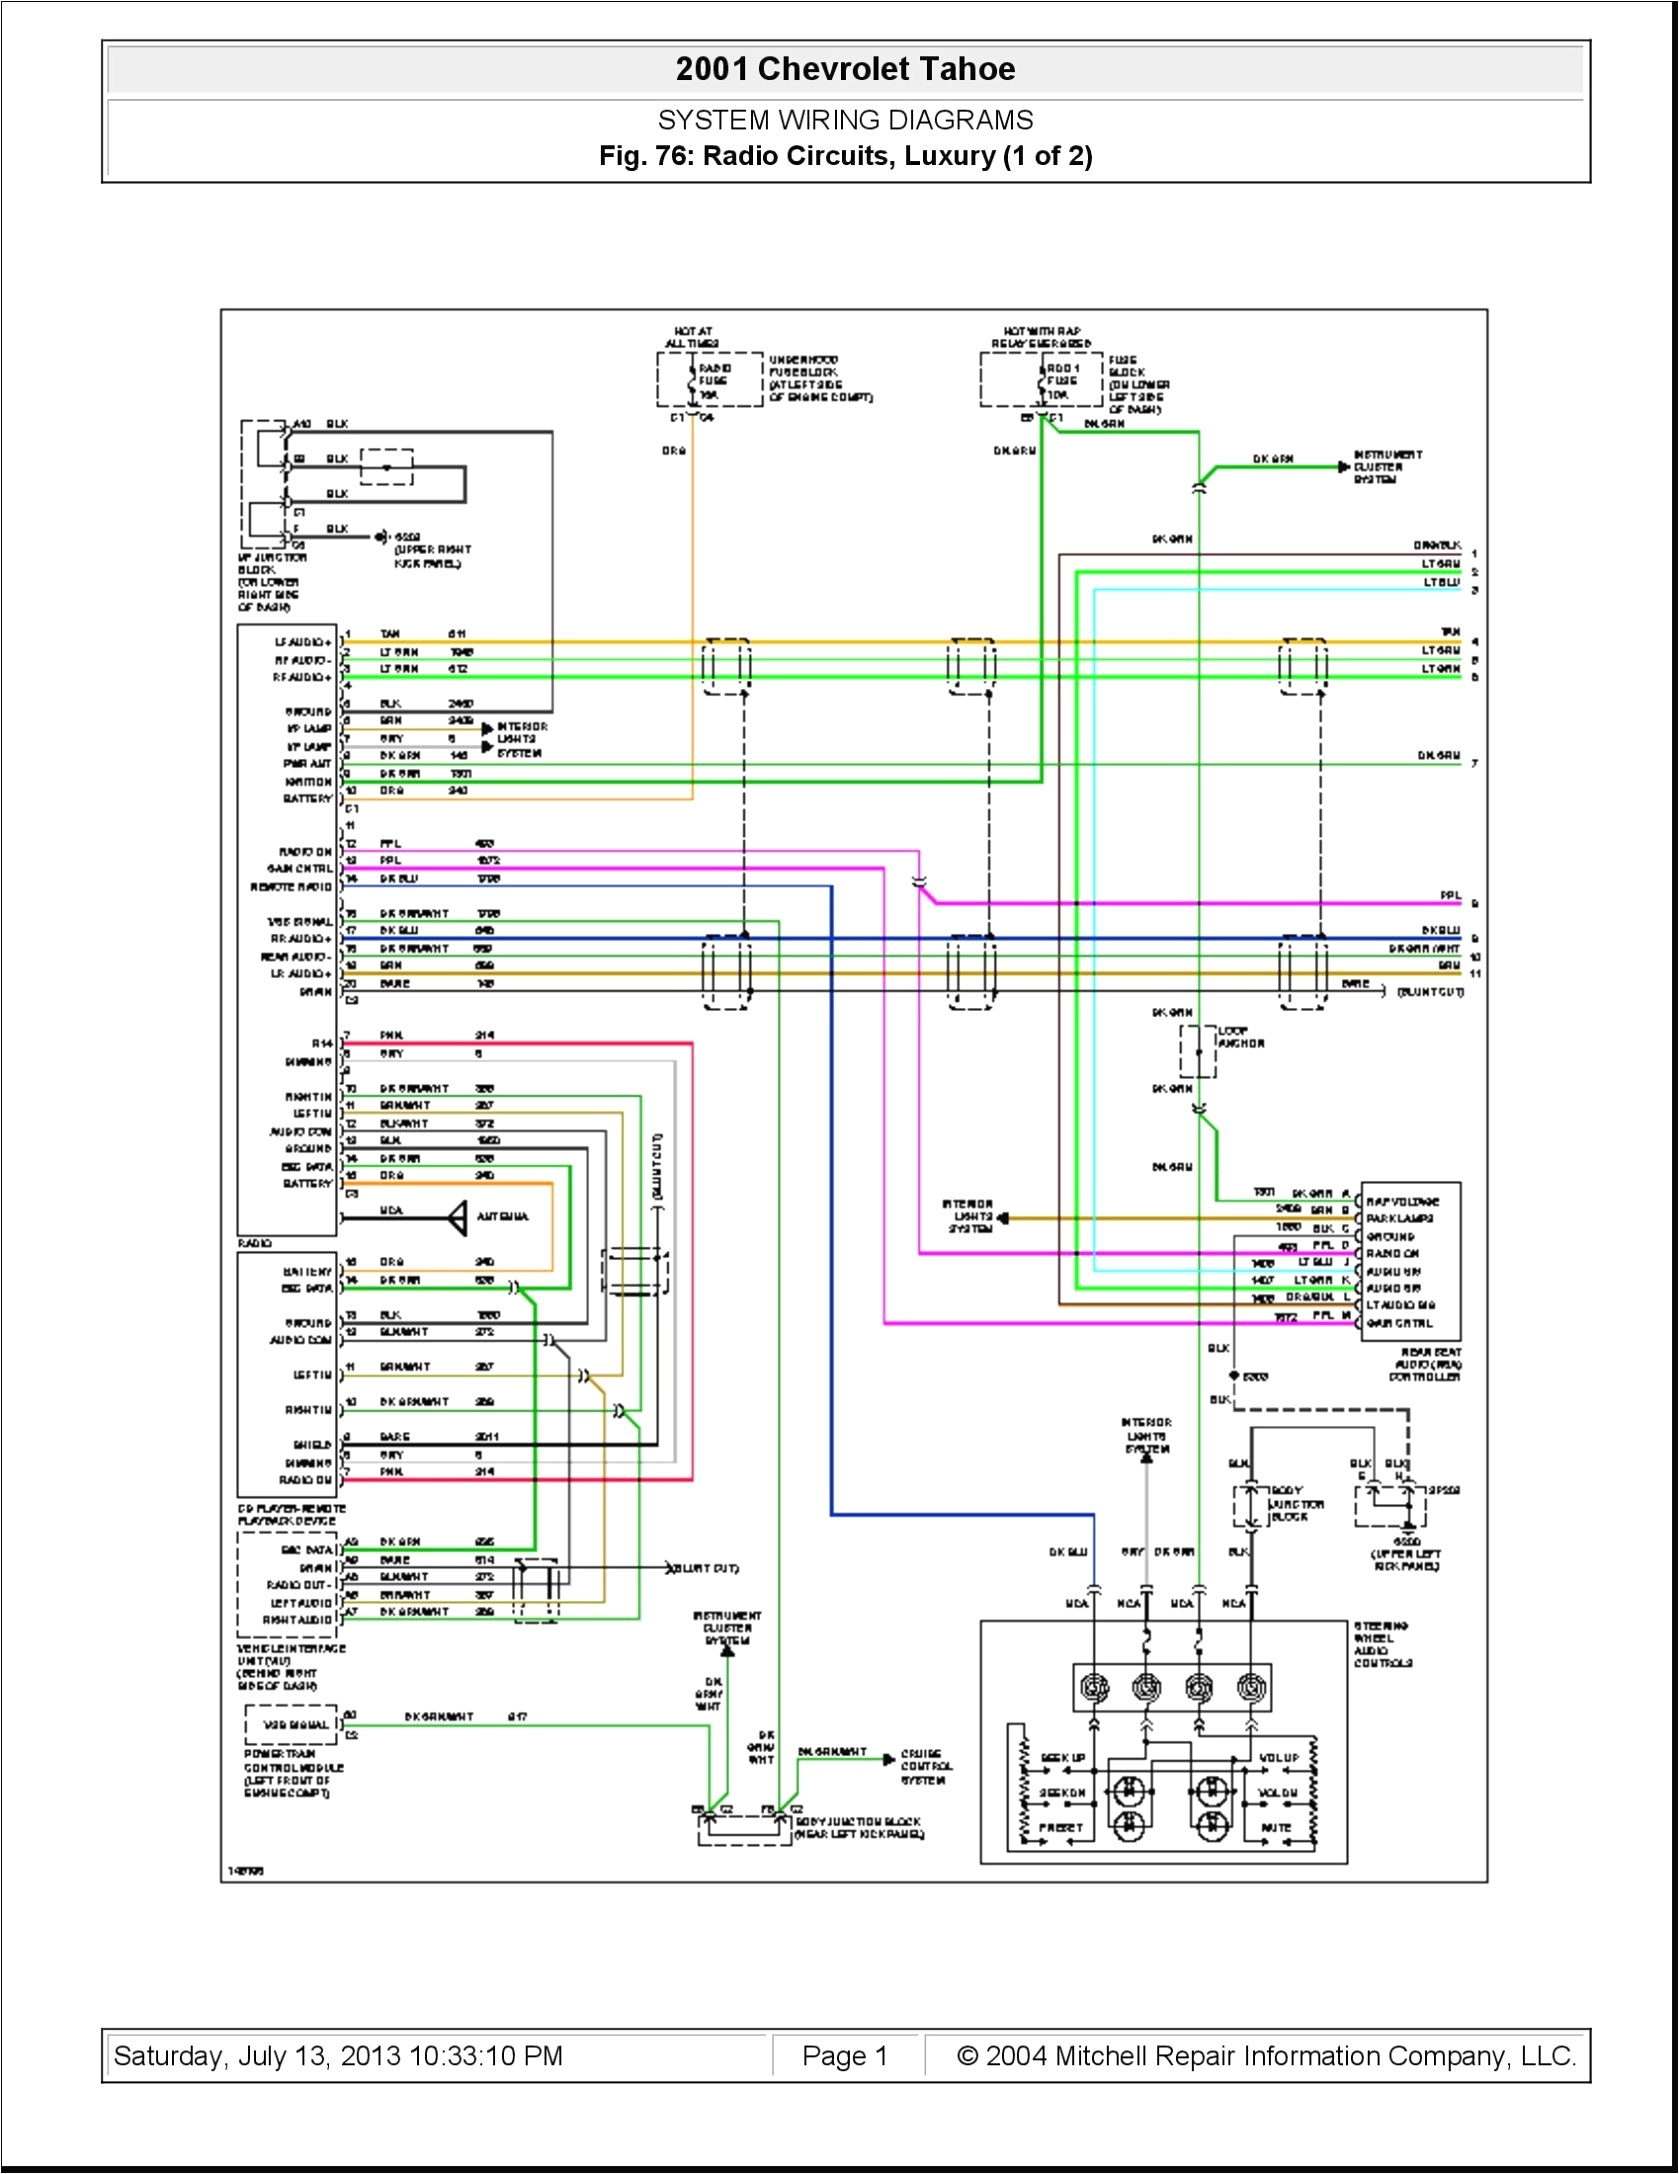 09 chevy traverse wiring diagram ignition coil wiring diagram 09 chevy traverse wiring diagram ignition coil